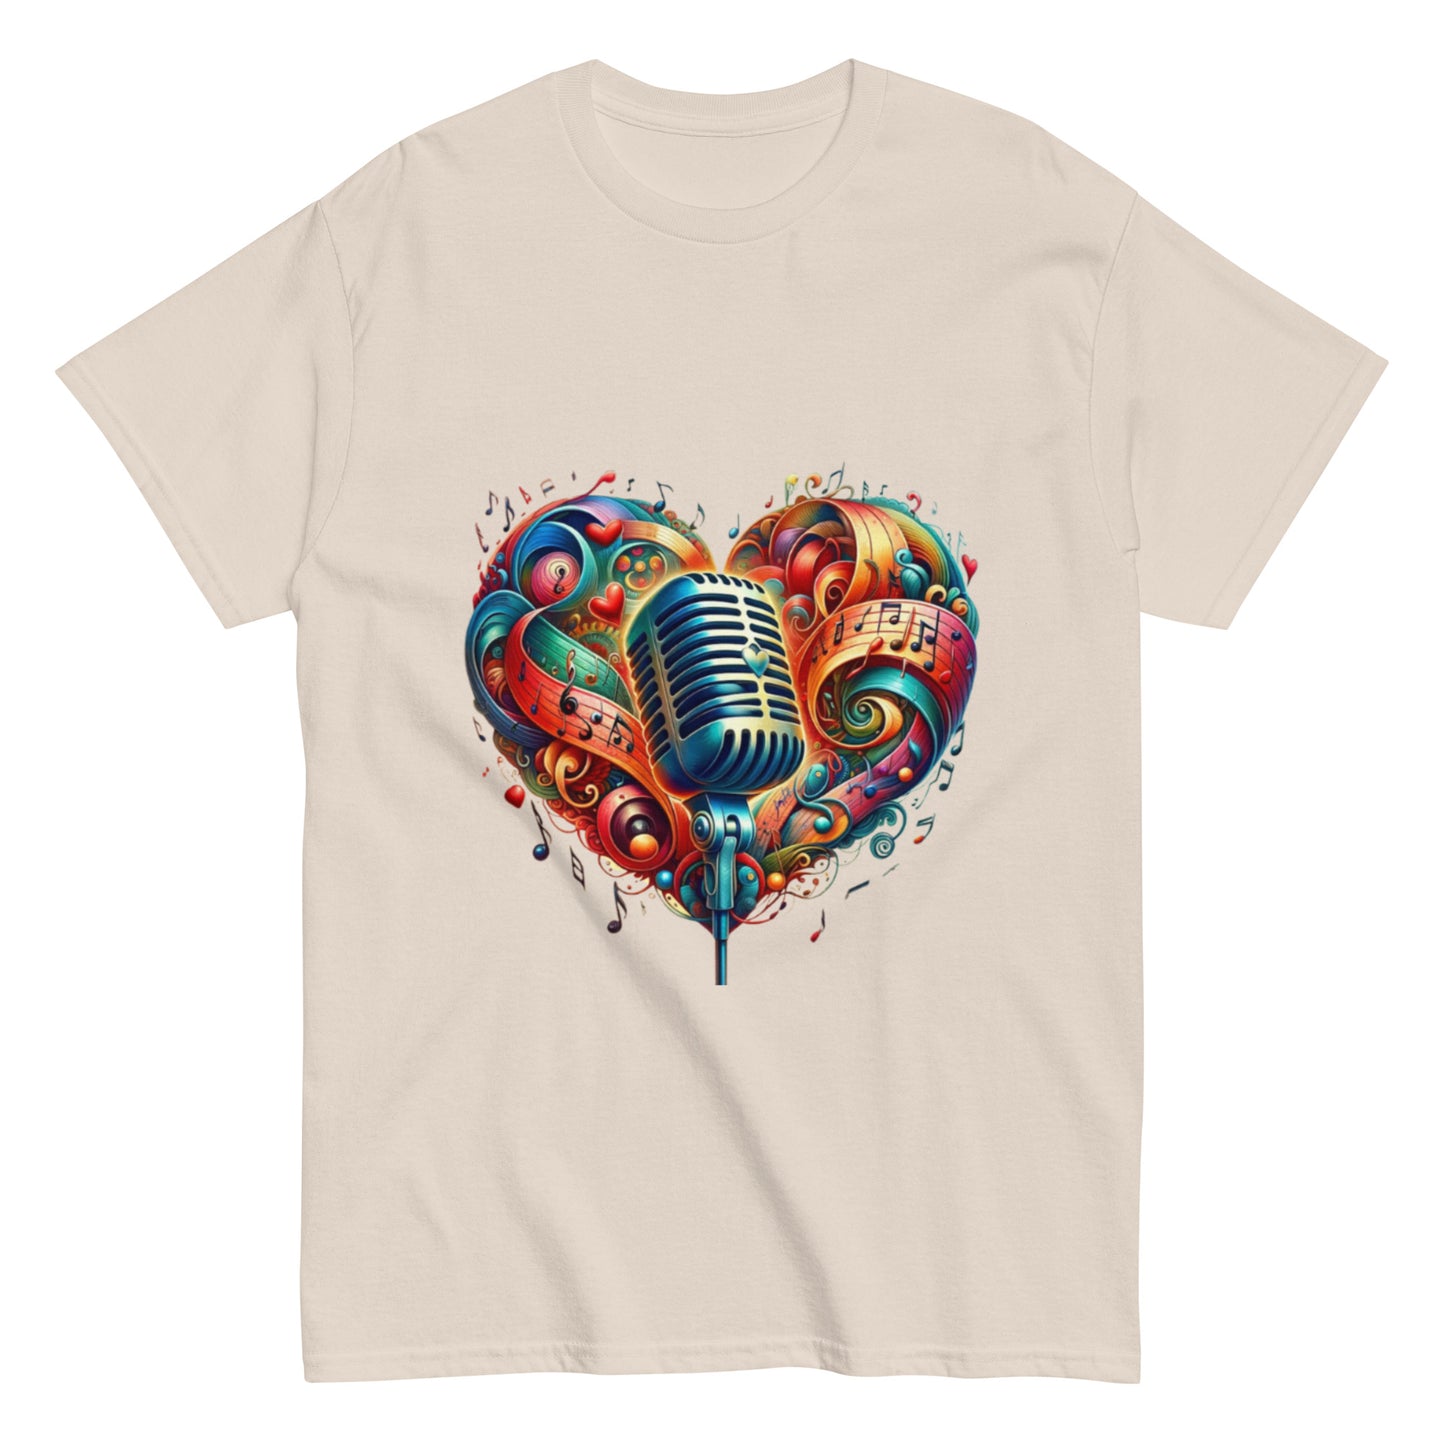 Music is My Heart and Soul Unisex T-Shirt